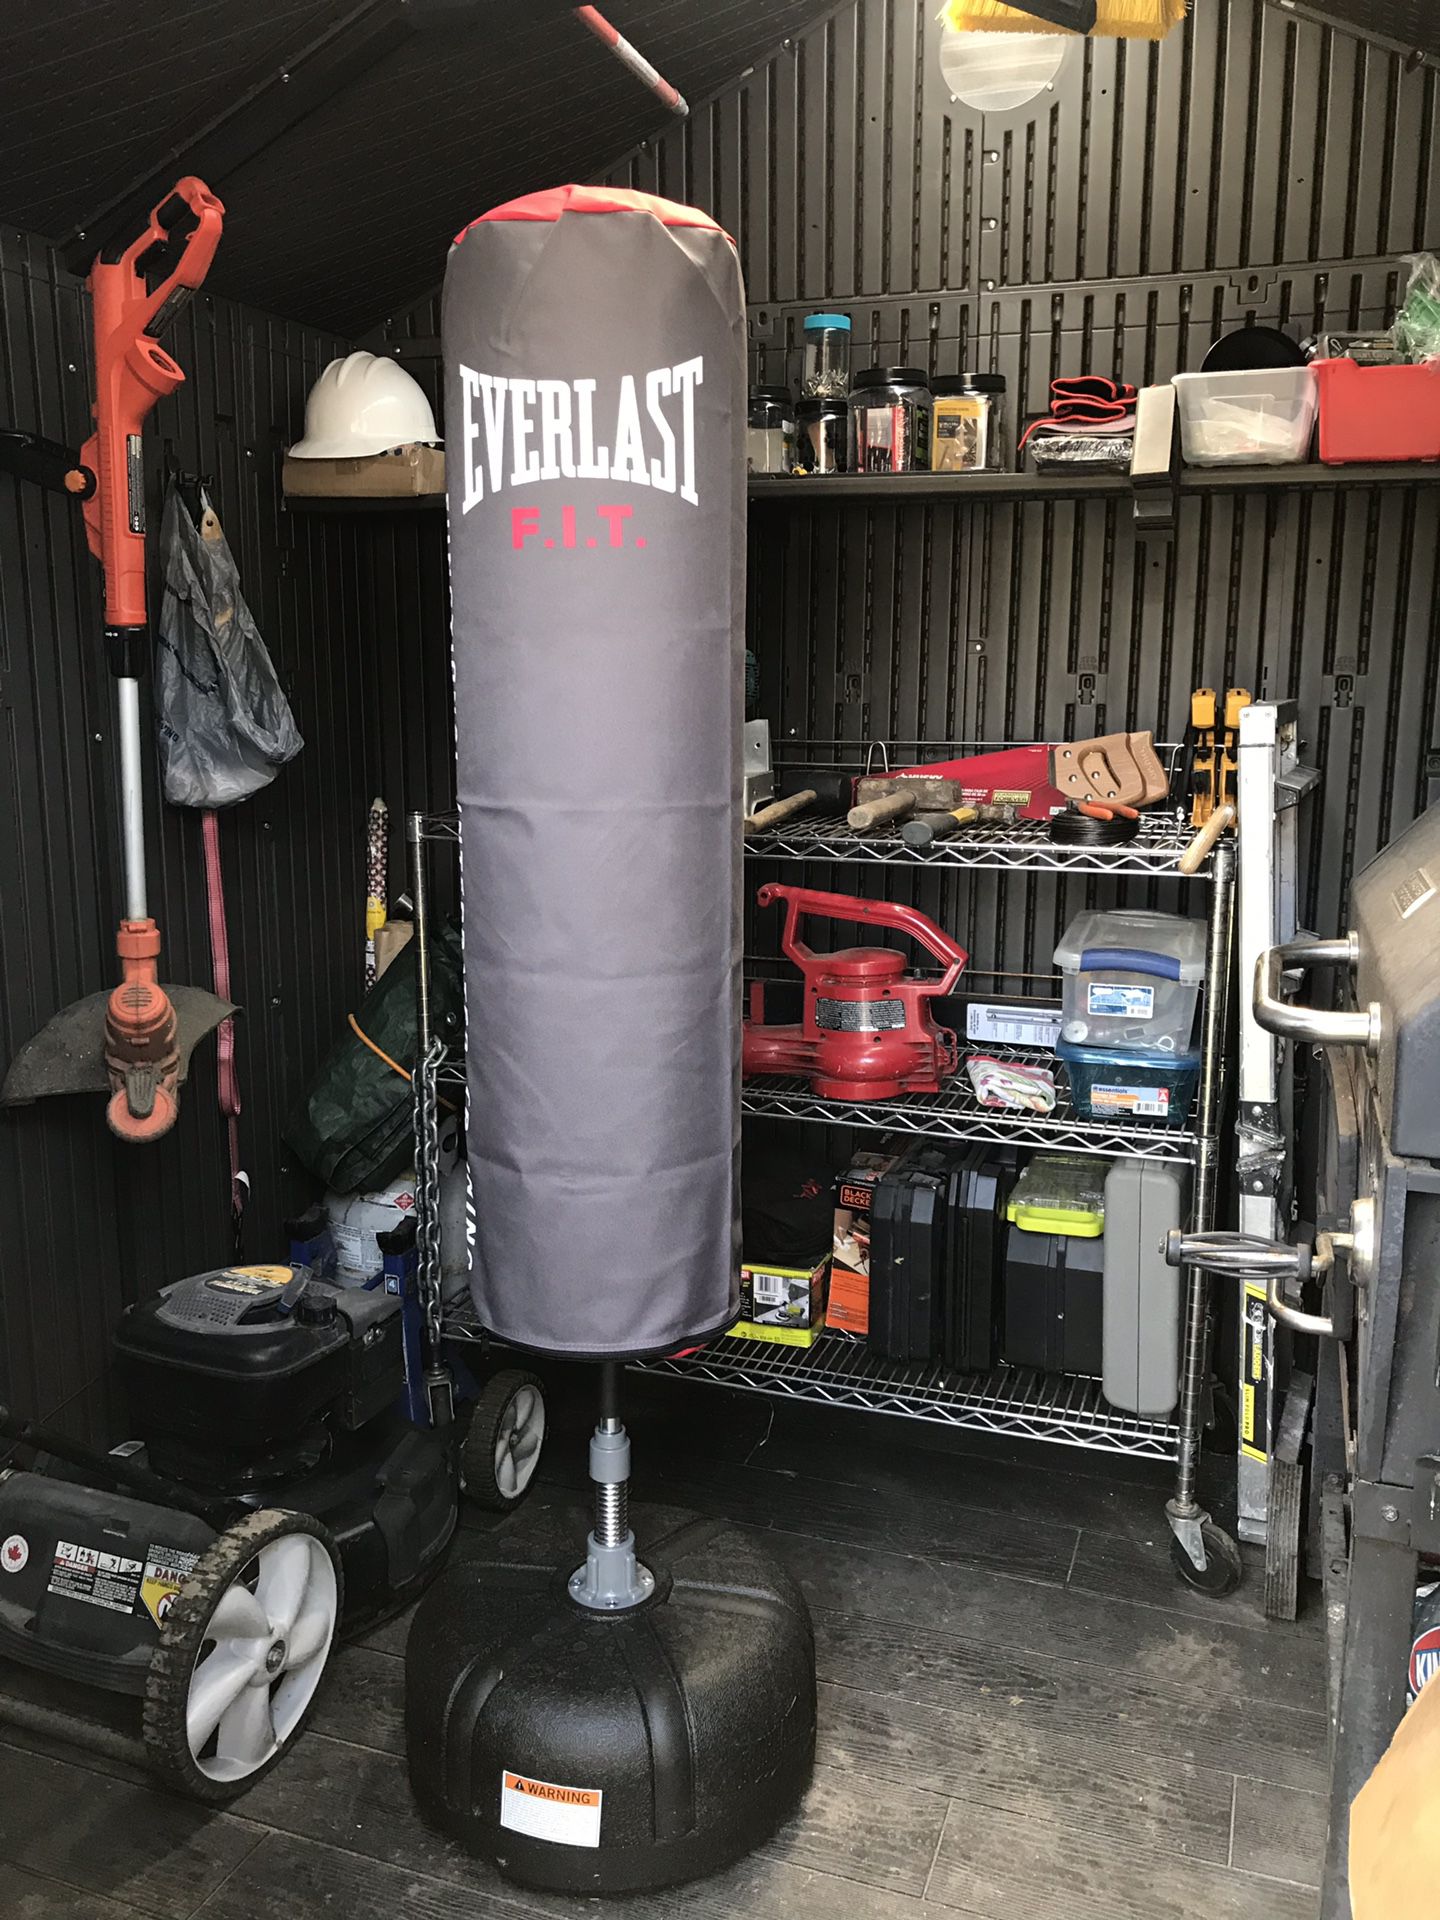 Ever last punching bag